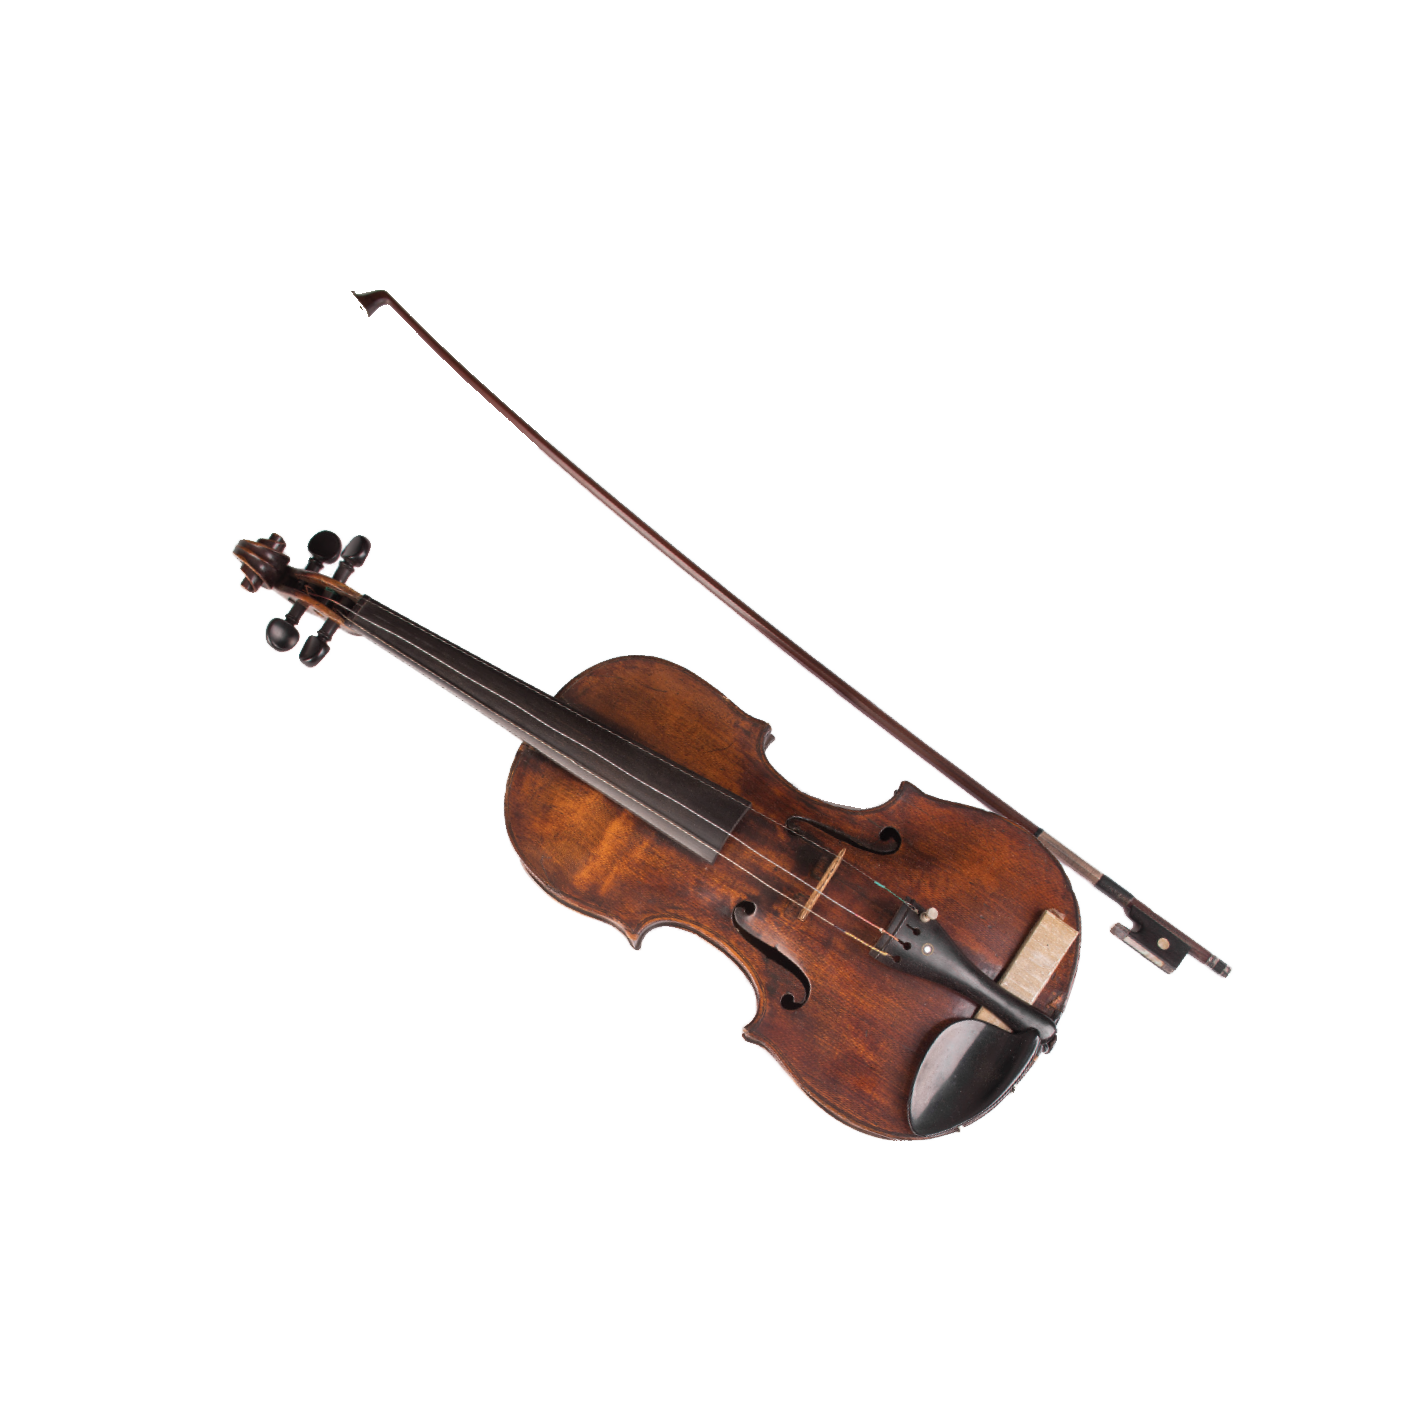 A violin with a bow